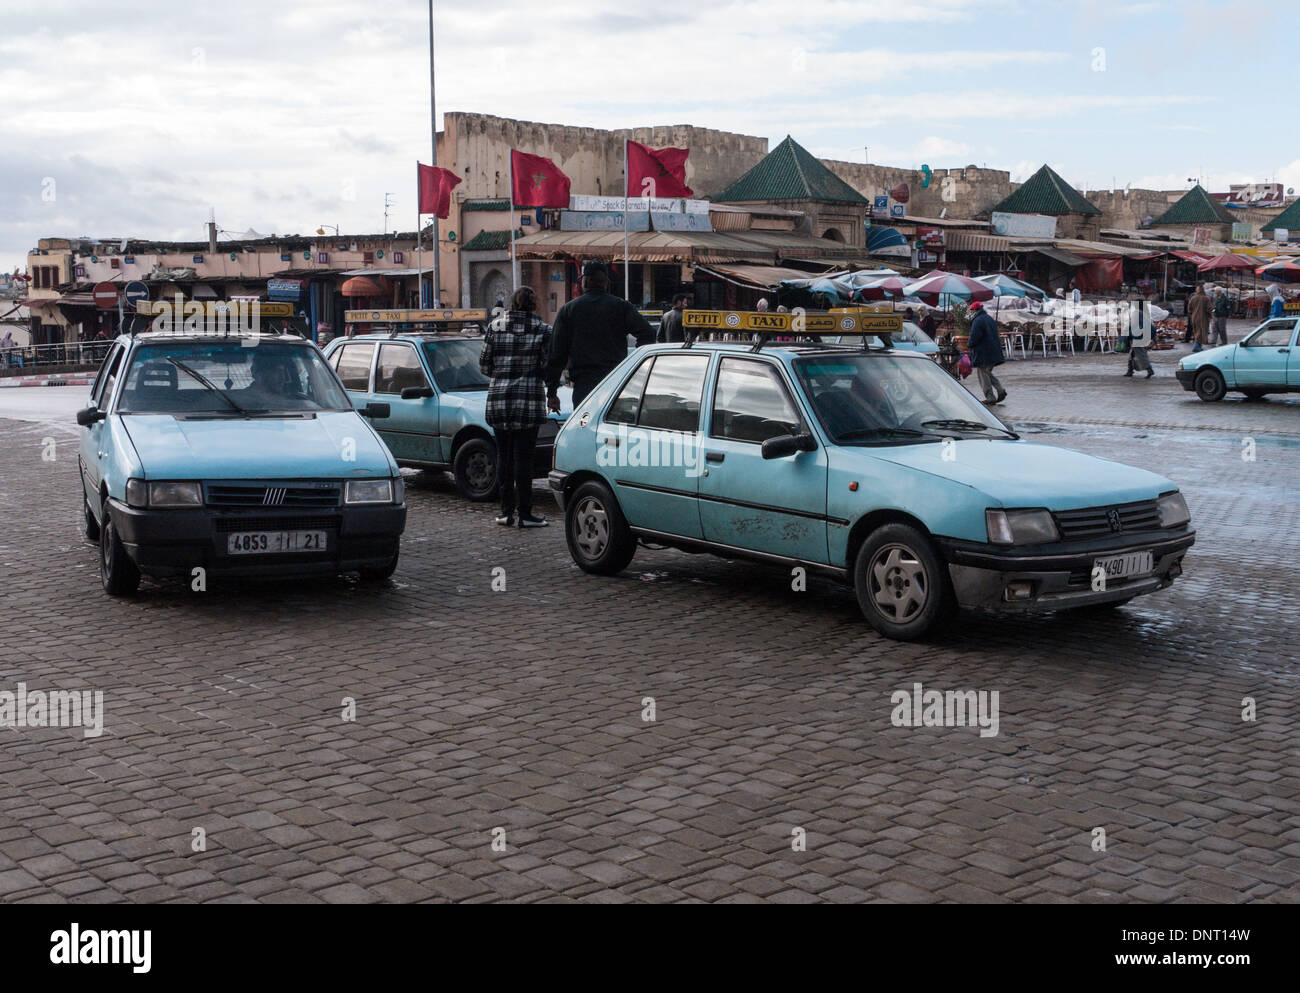 'Petit taxi' cars in Meknes, Morocco. They are privately owned and run but all the same colour - blue in Meknes Stock Photo